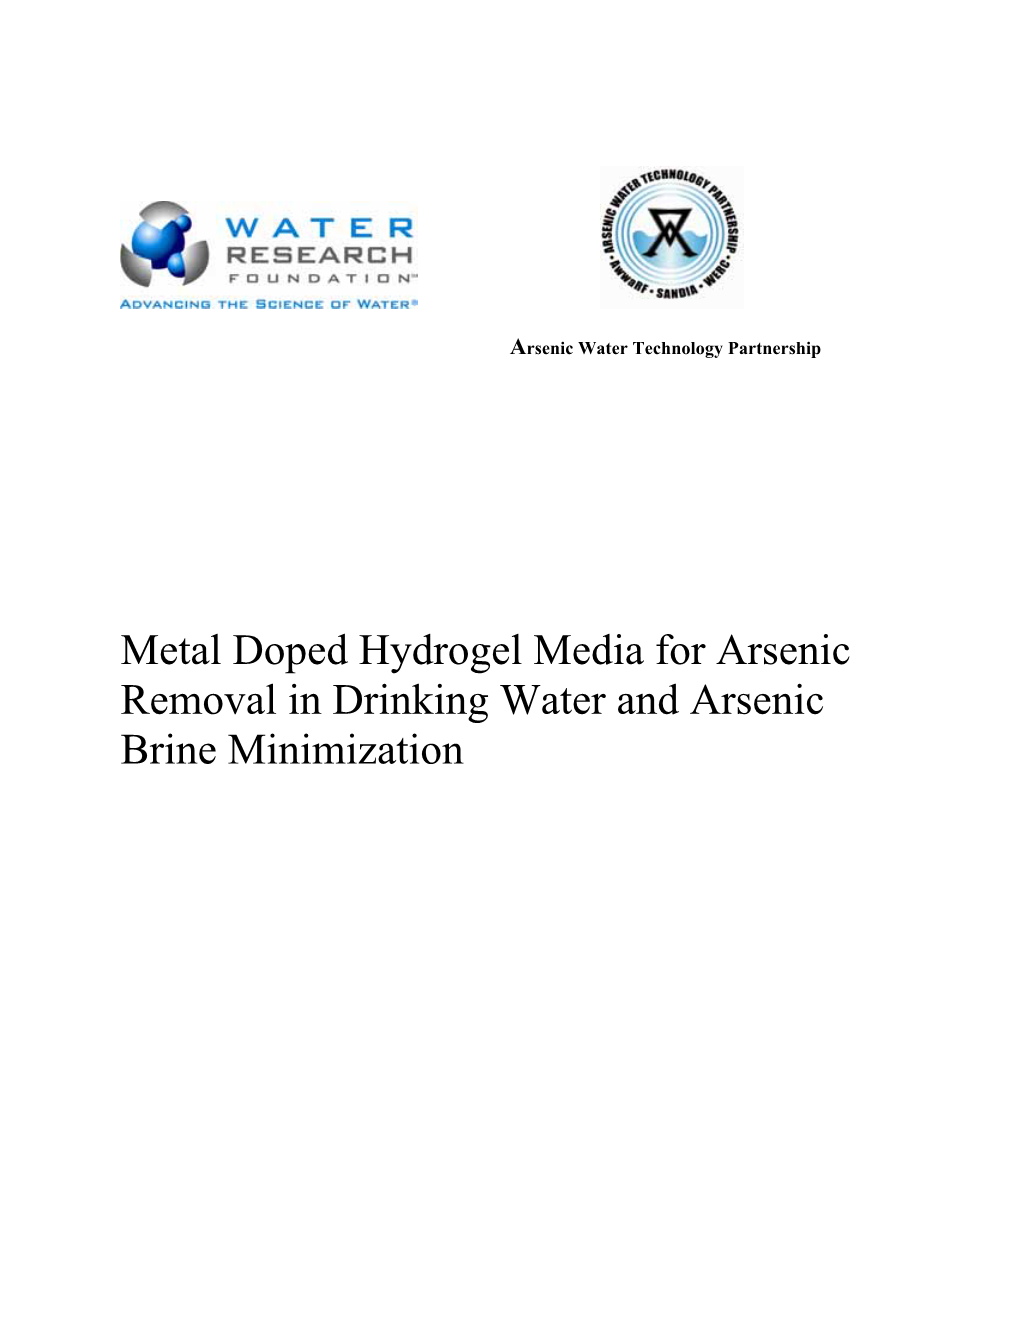 Metal Doped Hydrogel Media for Arsenic Removal in Drinking Water and Arsenic Brine Minimization